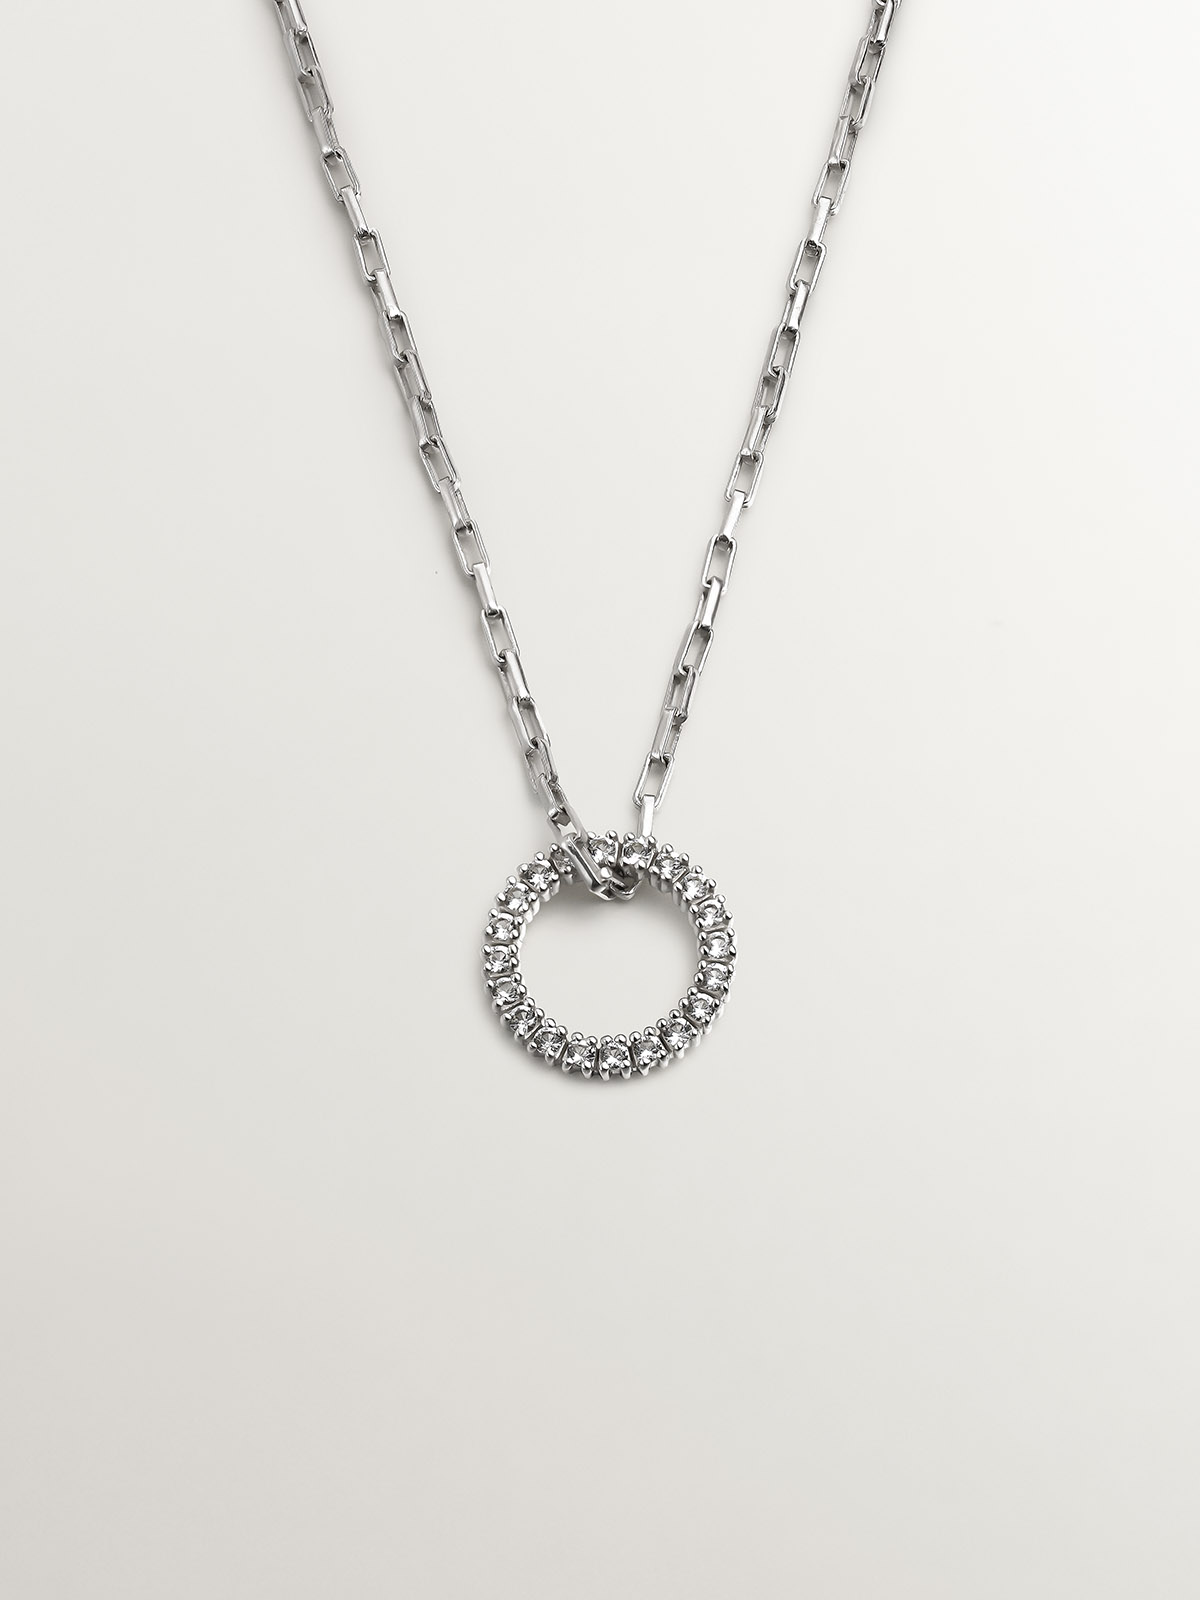 925 Silver pendant with circle of white topazes.